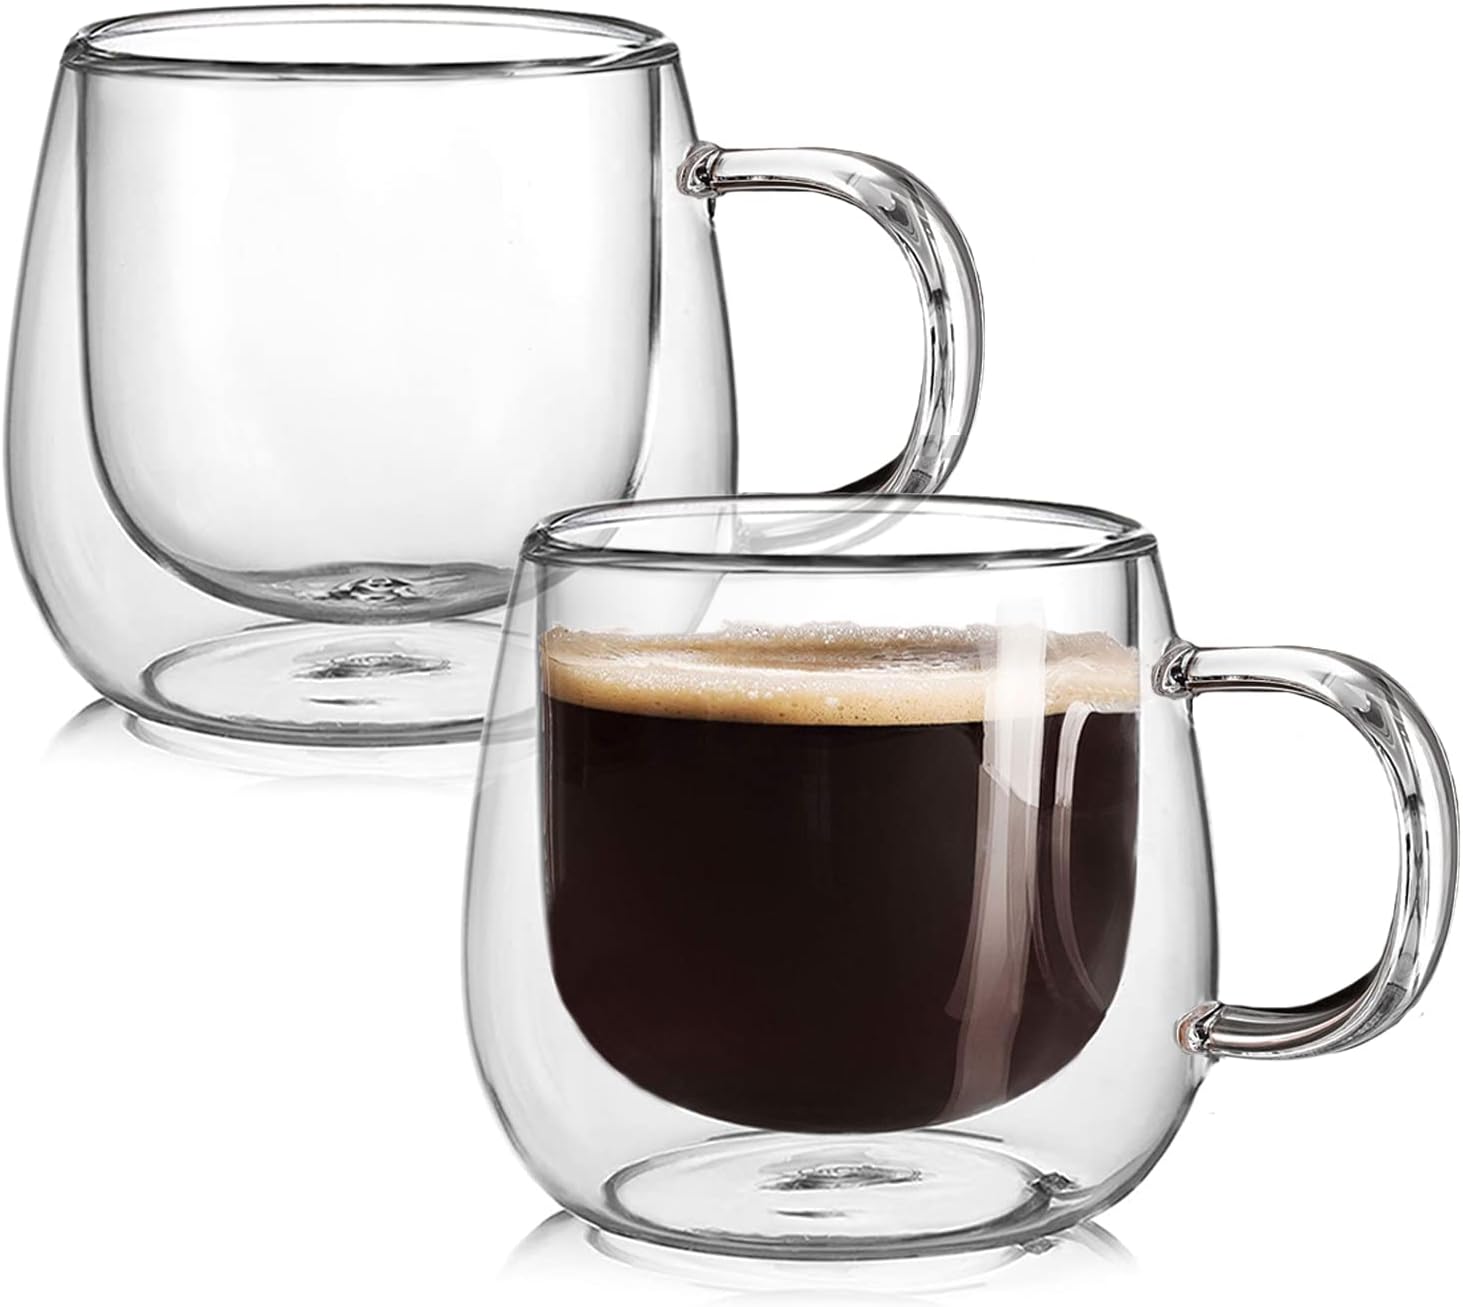  Mfacoy 2 PACK Glass Coffee Mugs with Handle & Spoon